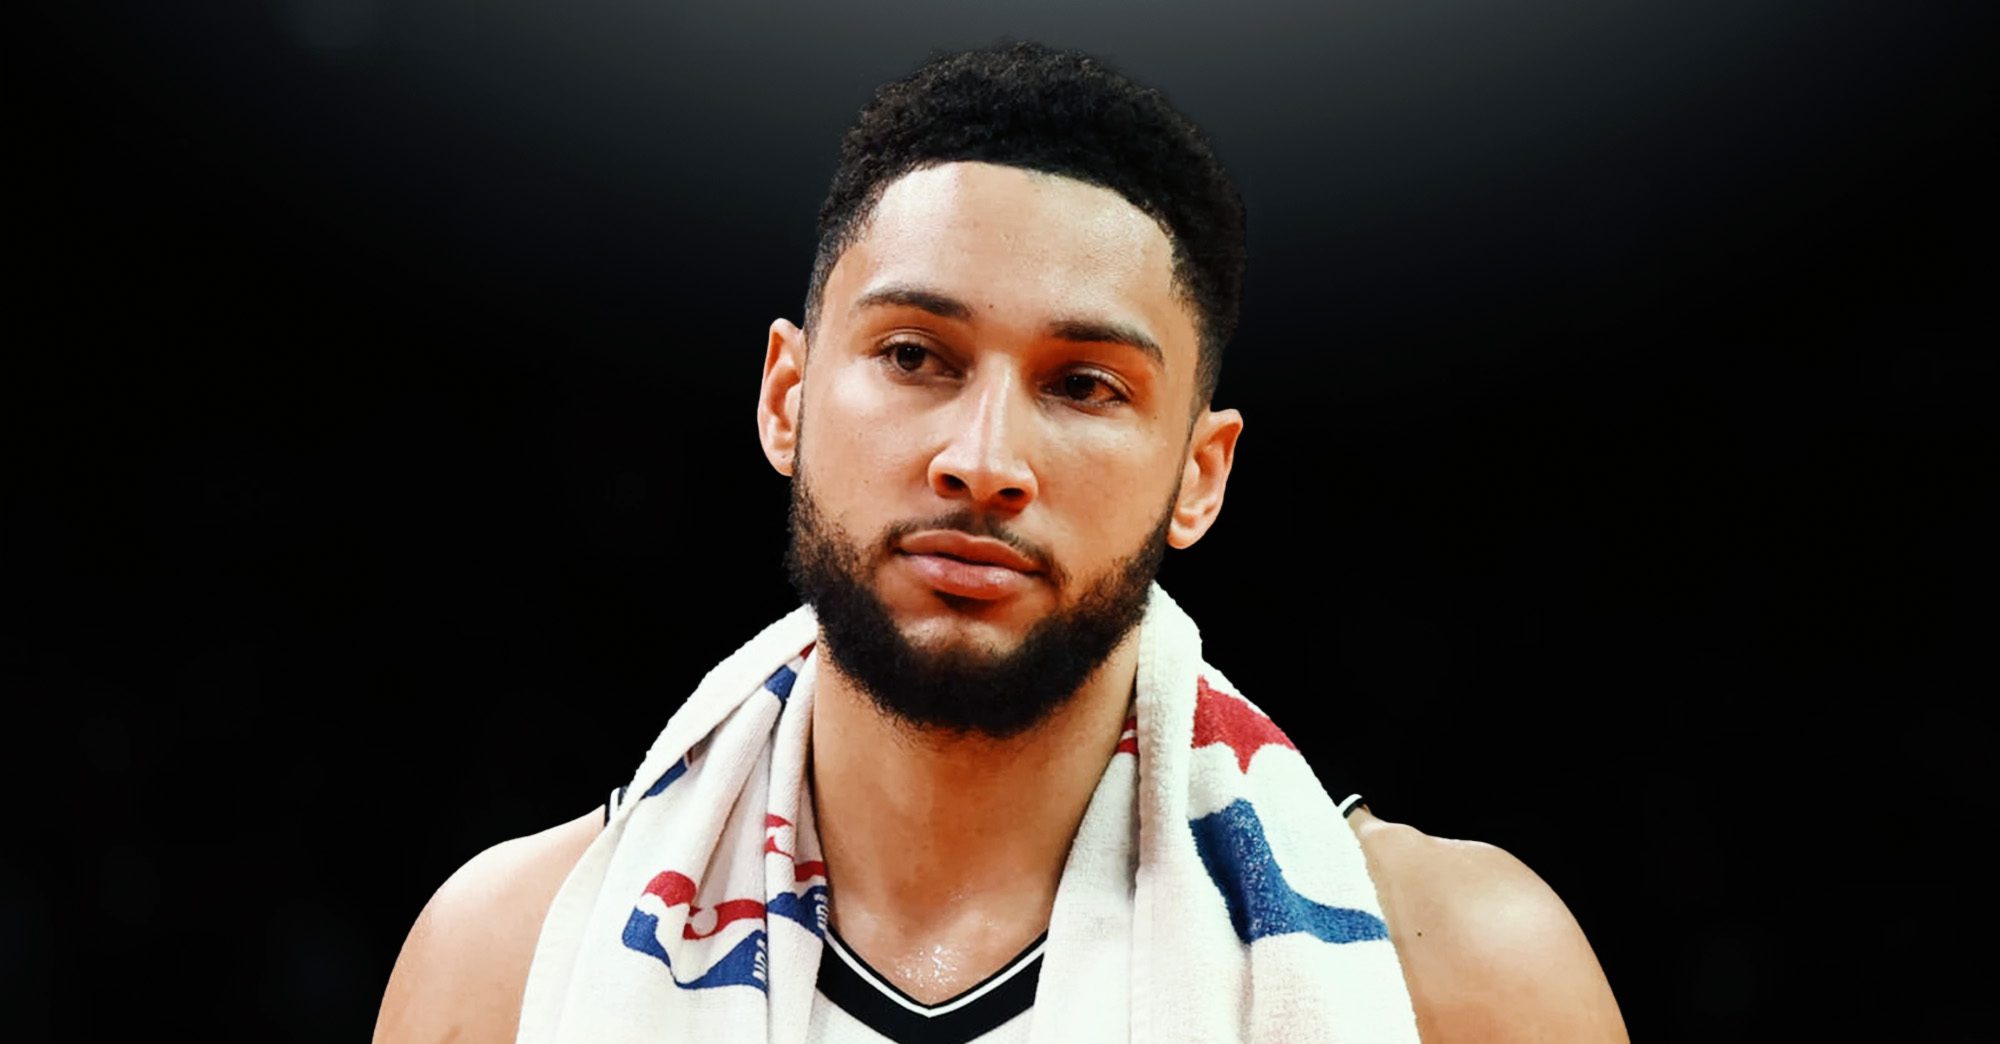 Ben Simmons at the ‘Most Frustrating Point’ of His Career